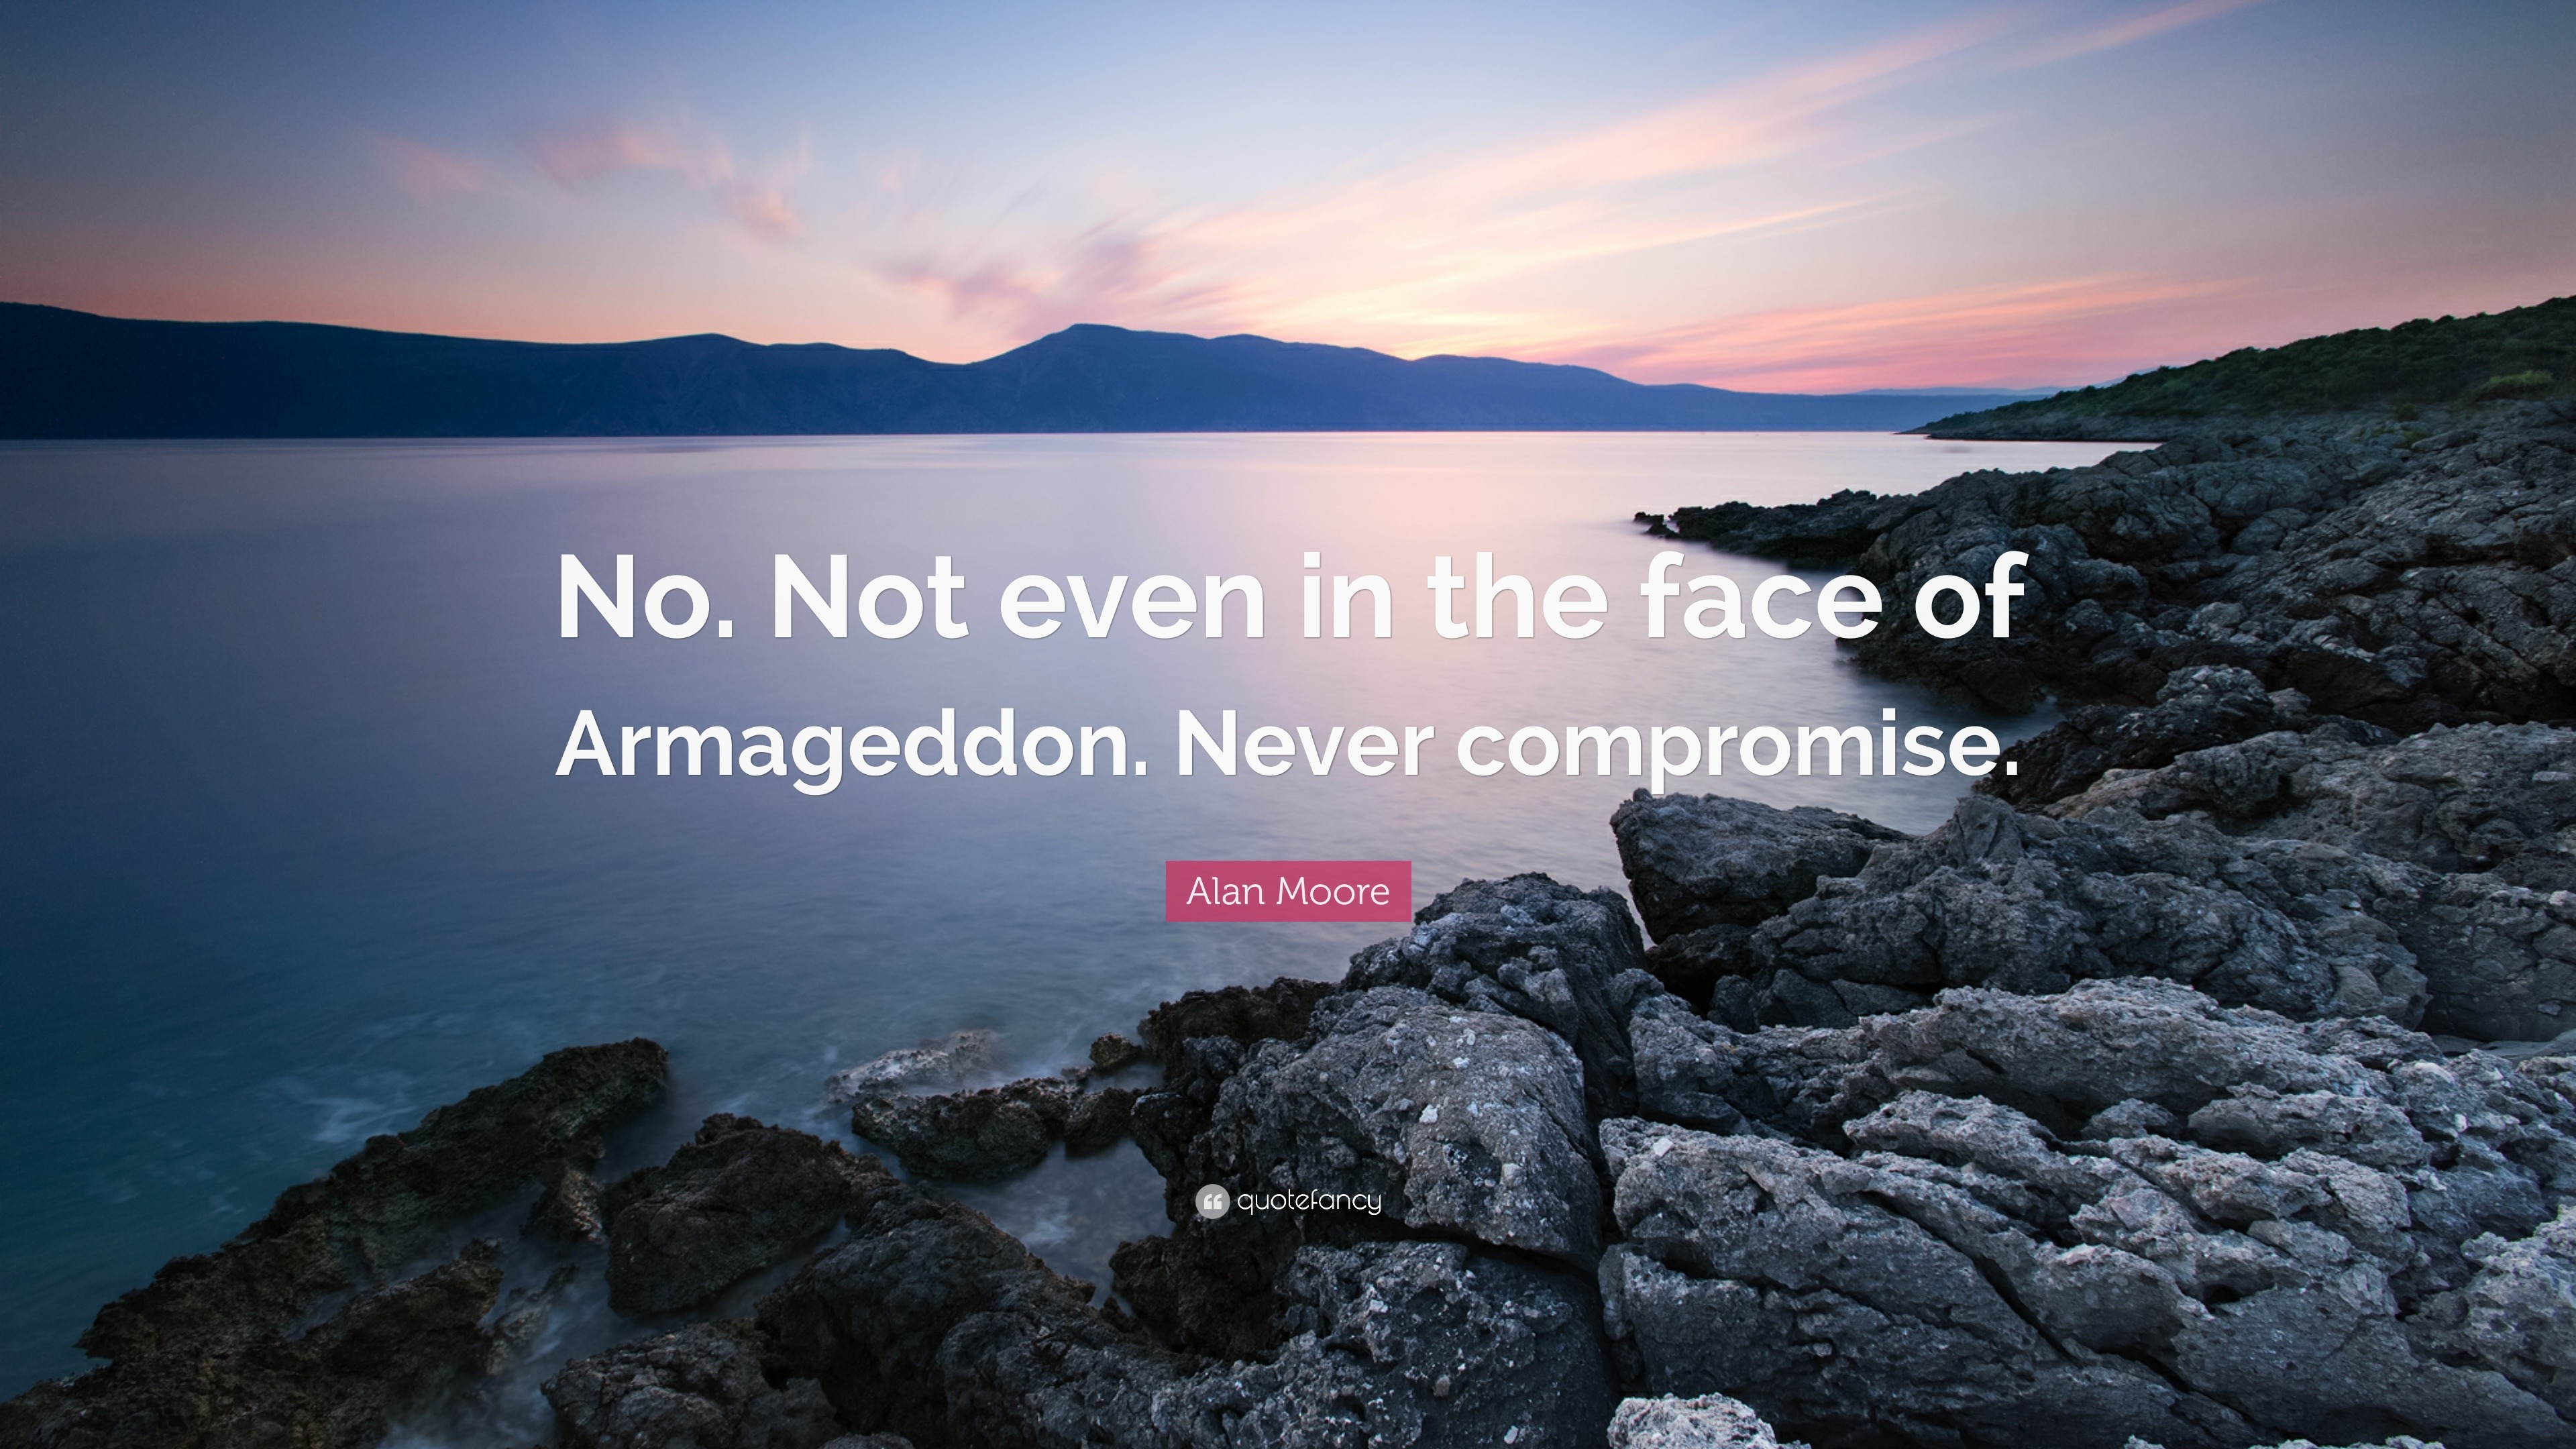 Never compromise. Not even in the face of Armageddon. - Rorschach  (Watchmen) [1280x800] : r/QuotesPorn